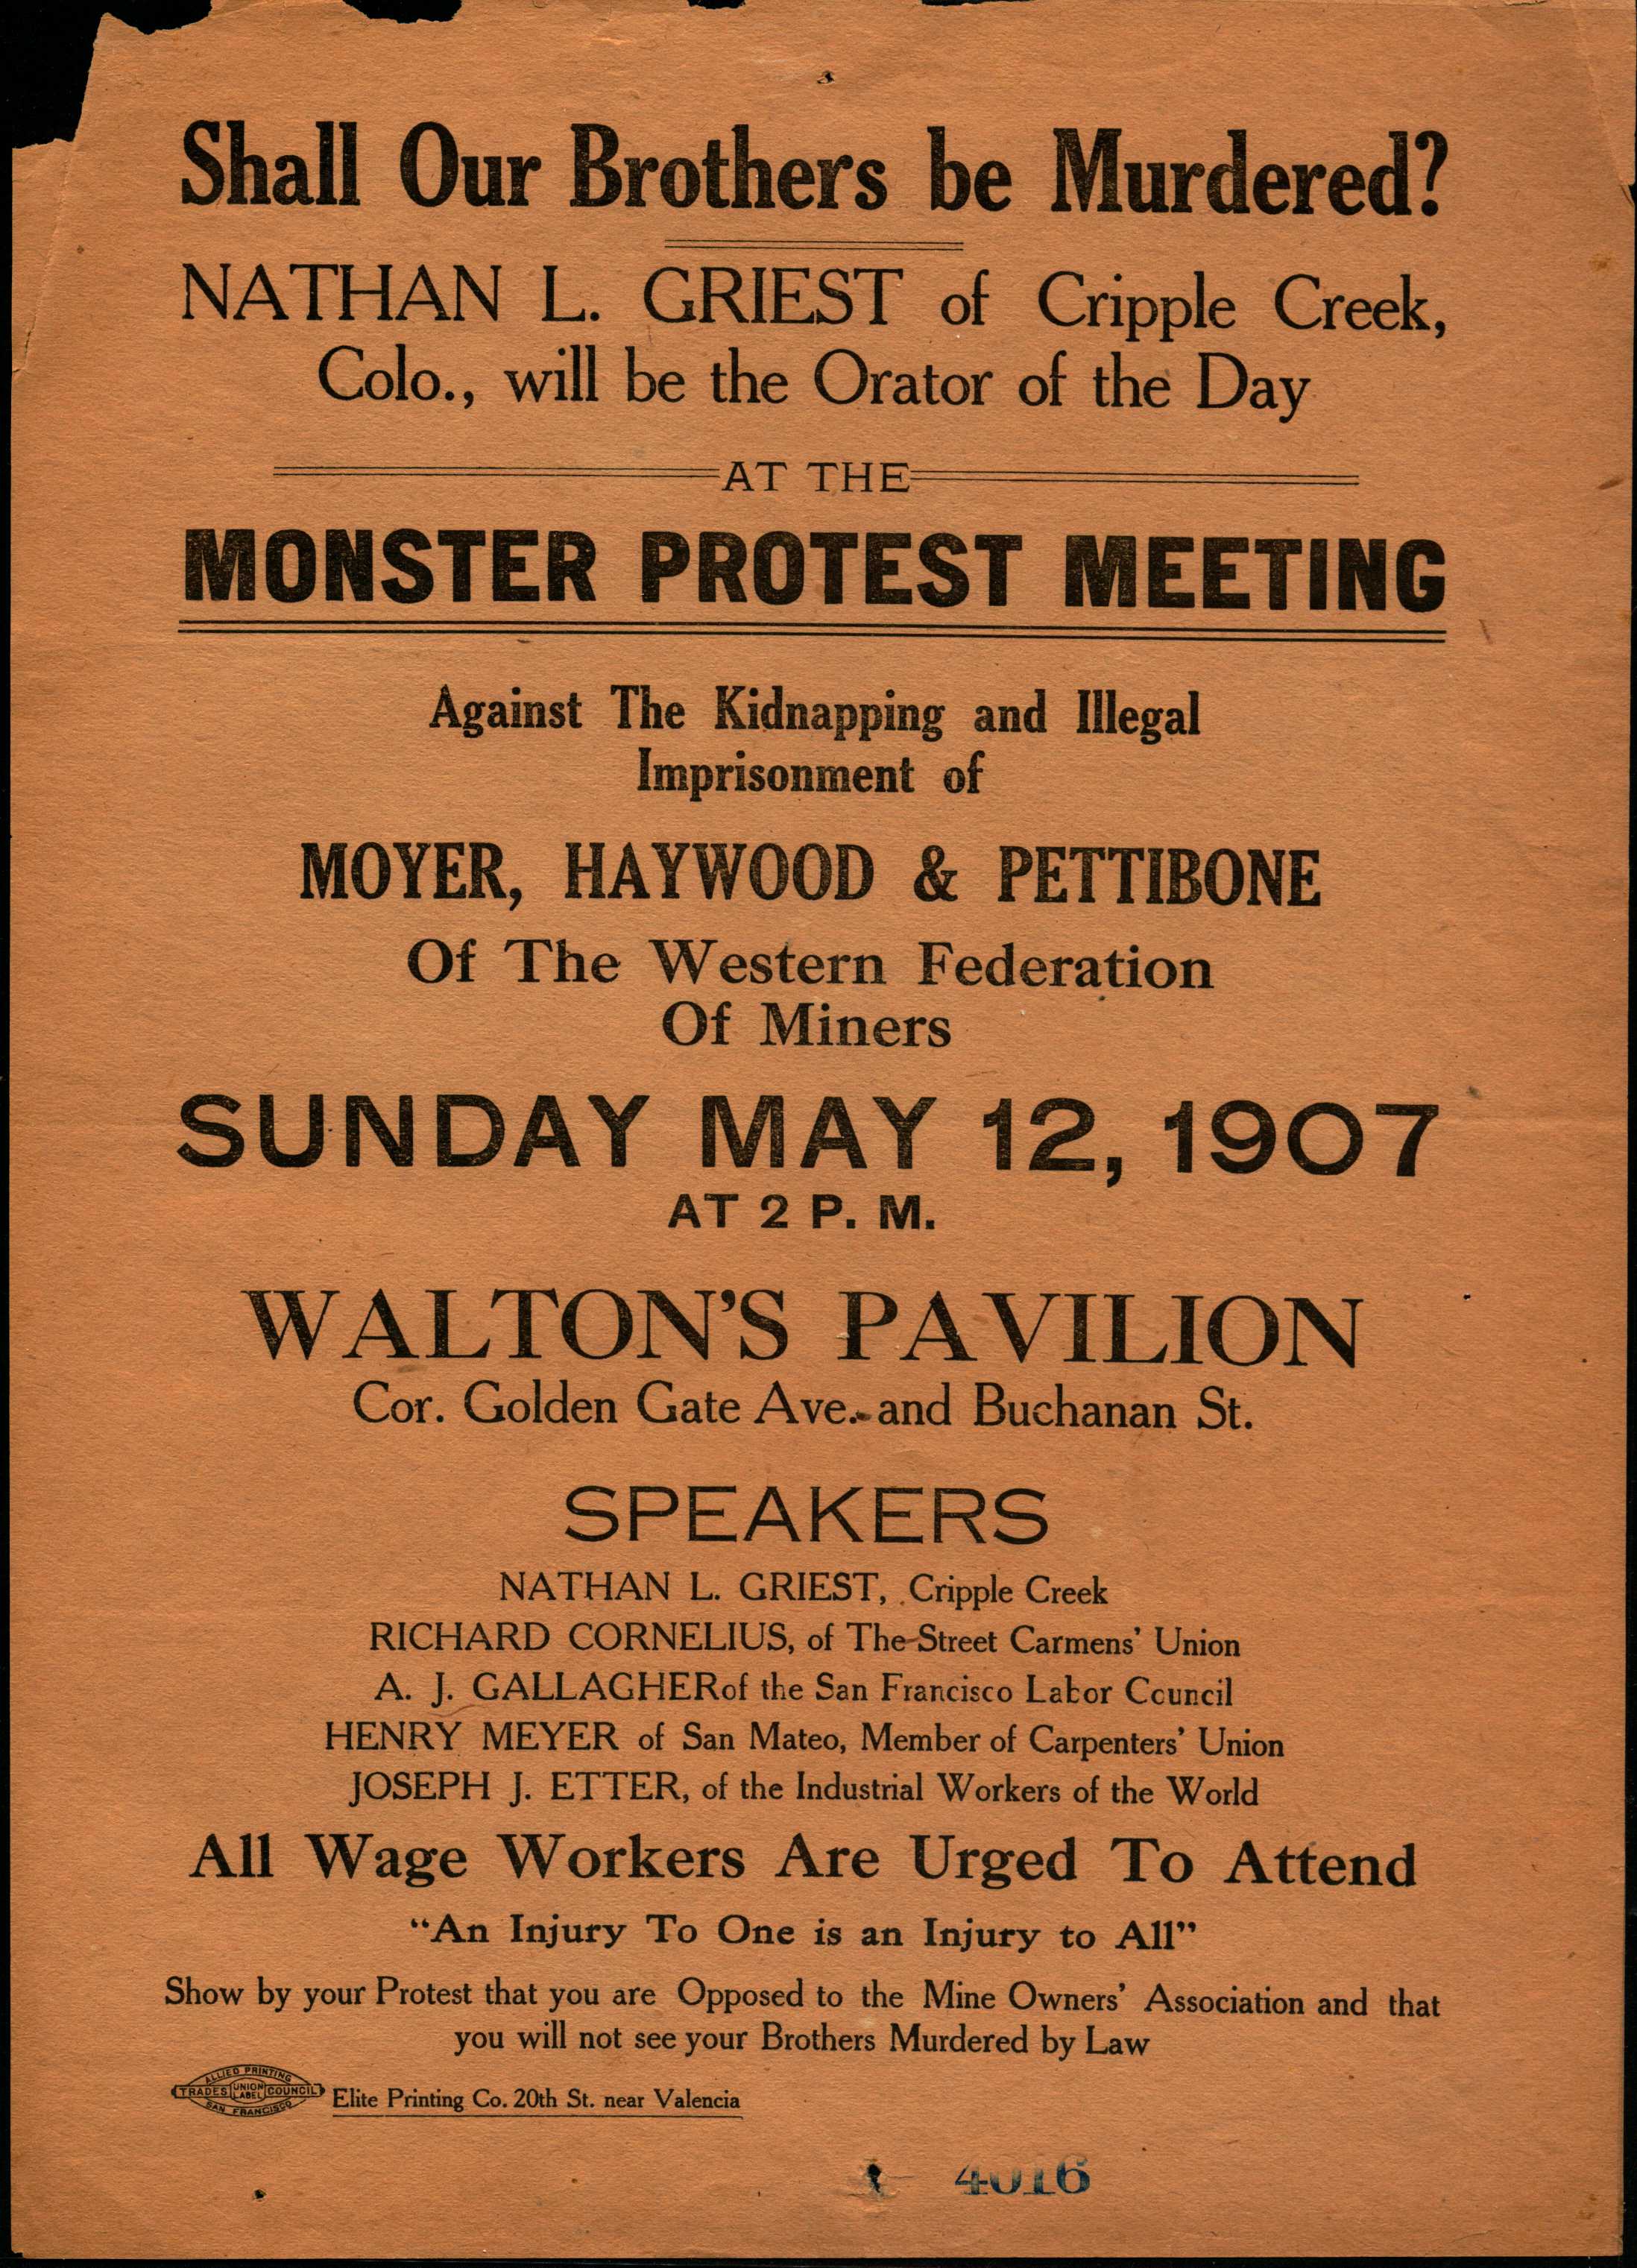 Shows information about the protest meeting such as where it met and various speakers